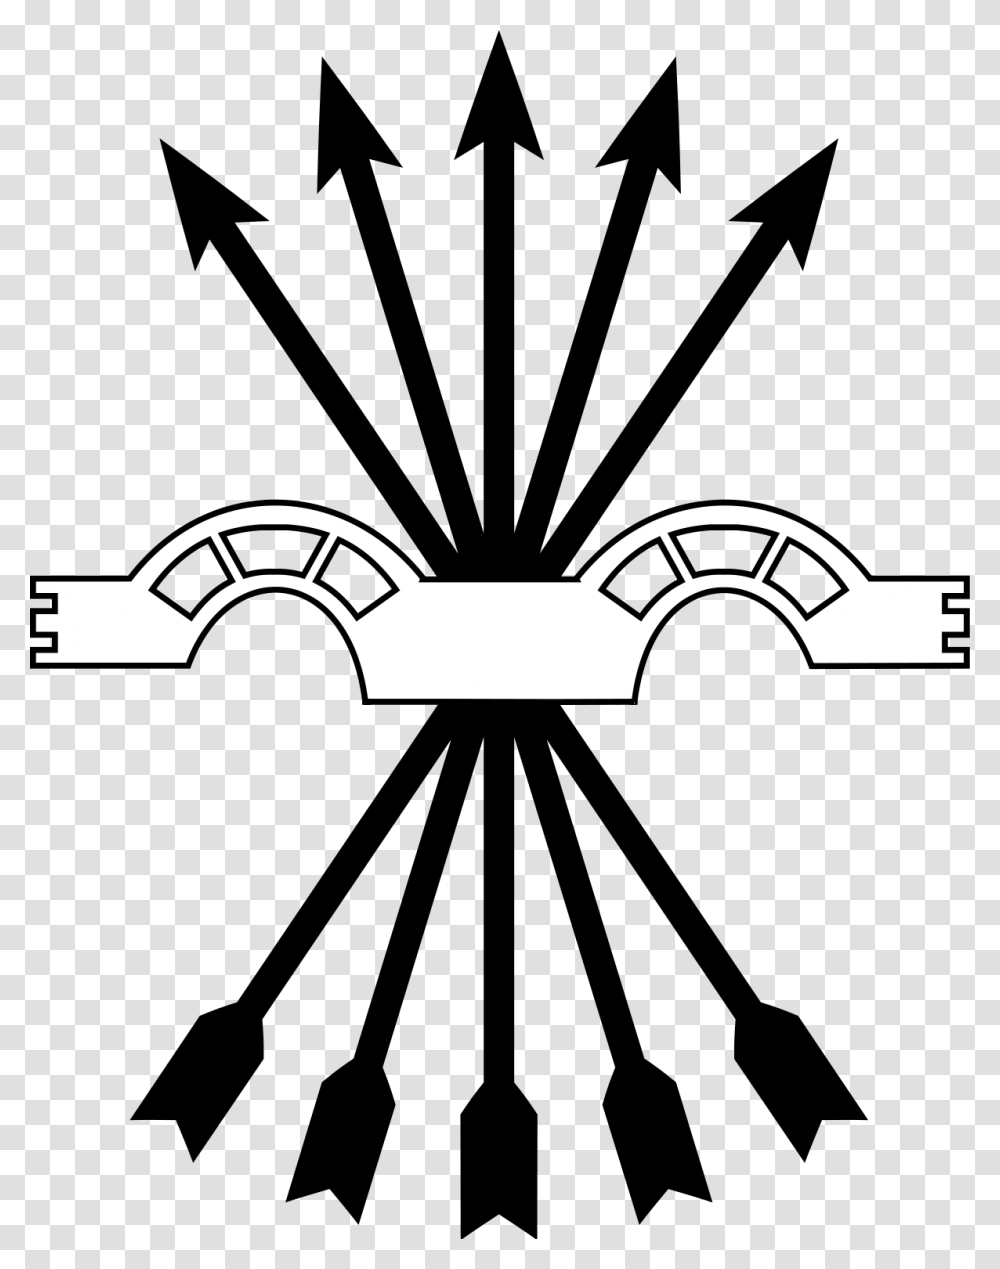 Yoke And Arrows, Stencil, Silhouette Transparent Png